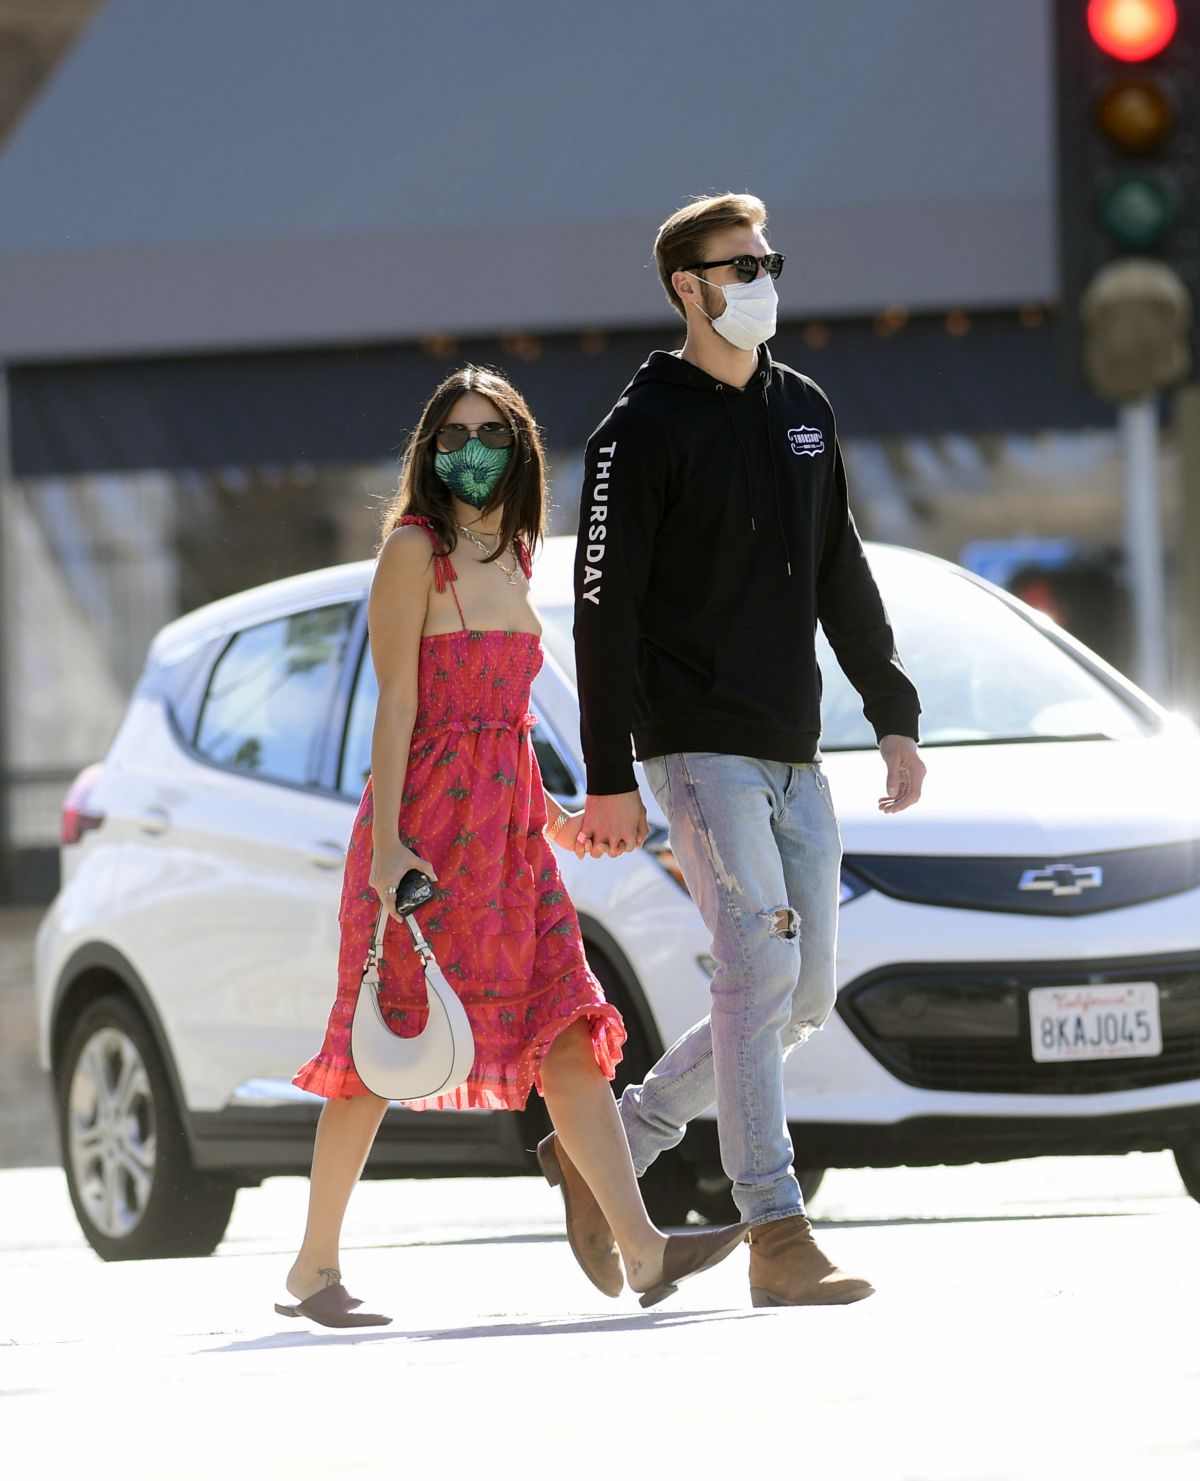 eiza-gonzalez-and-dusty-lachowicz-out-shopping-in-los-angeles-12-13-2020-2.jpg